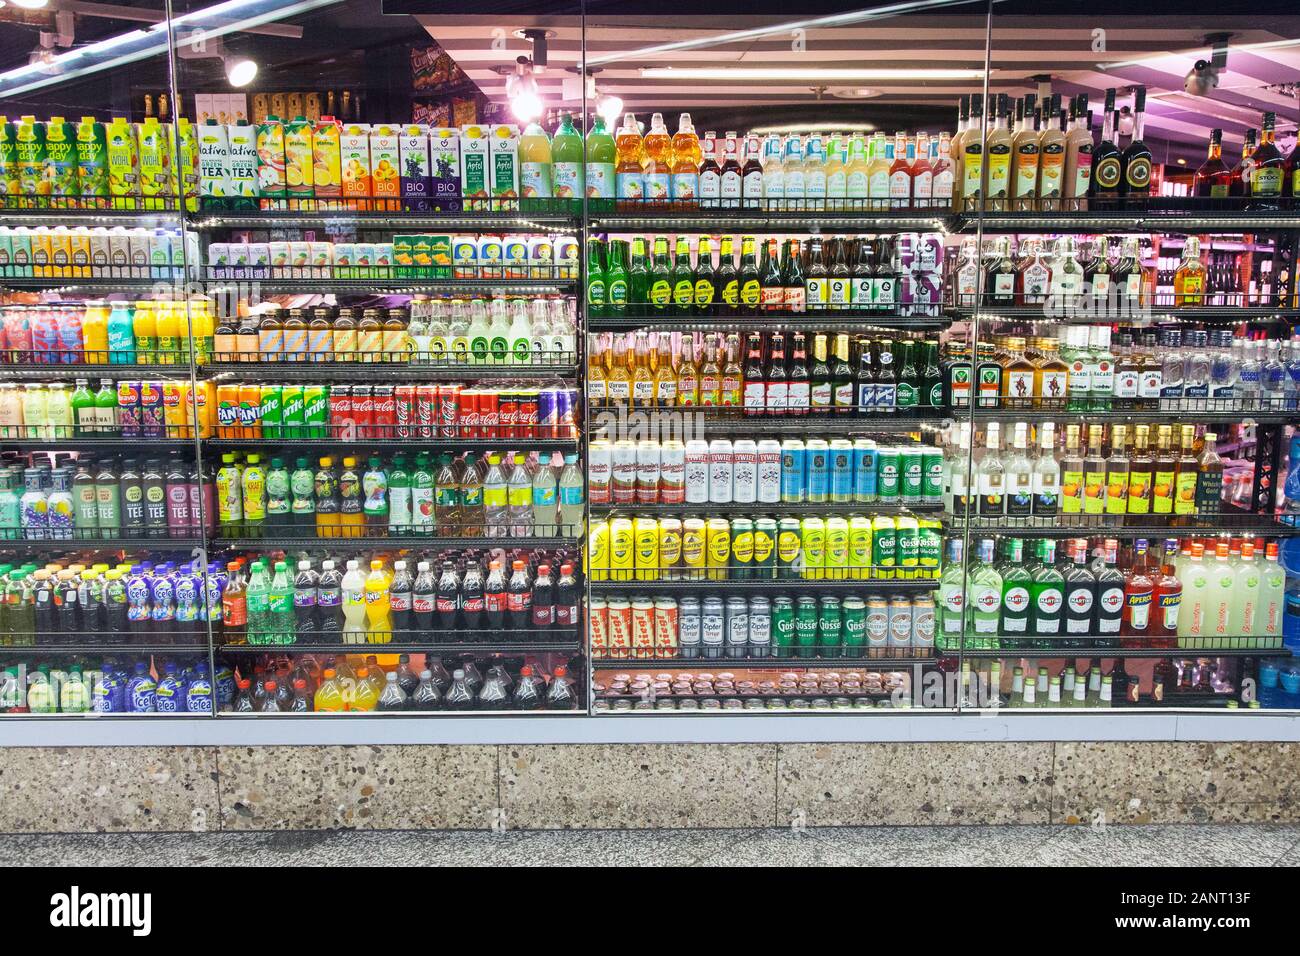 Canned and bottled drinks display, Schottentor station, University Station, Vienna, Austria. Stock Photo